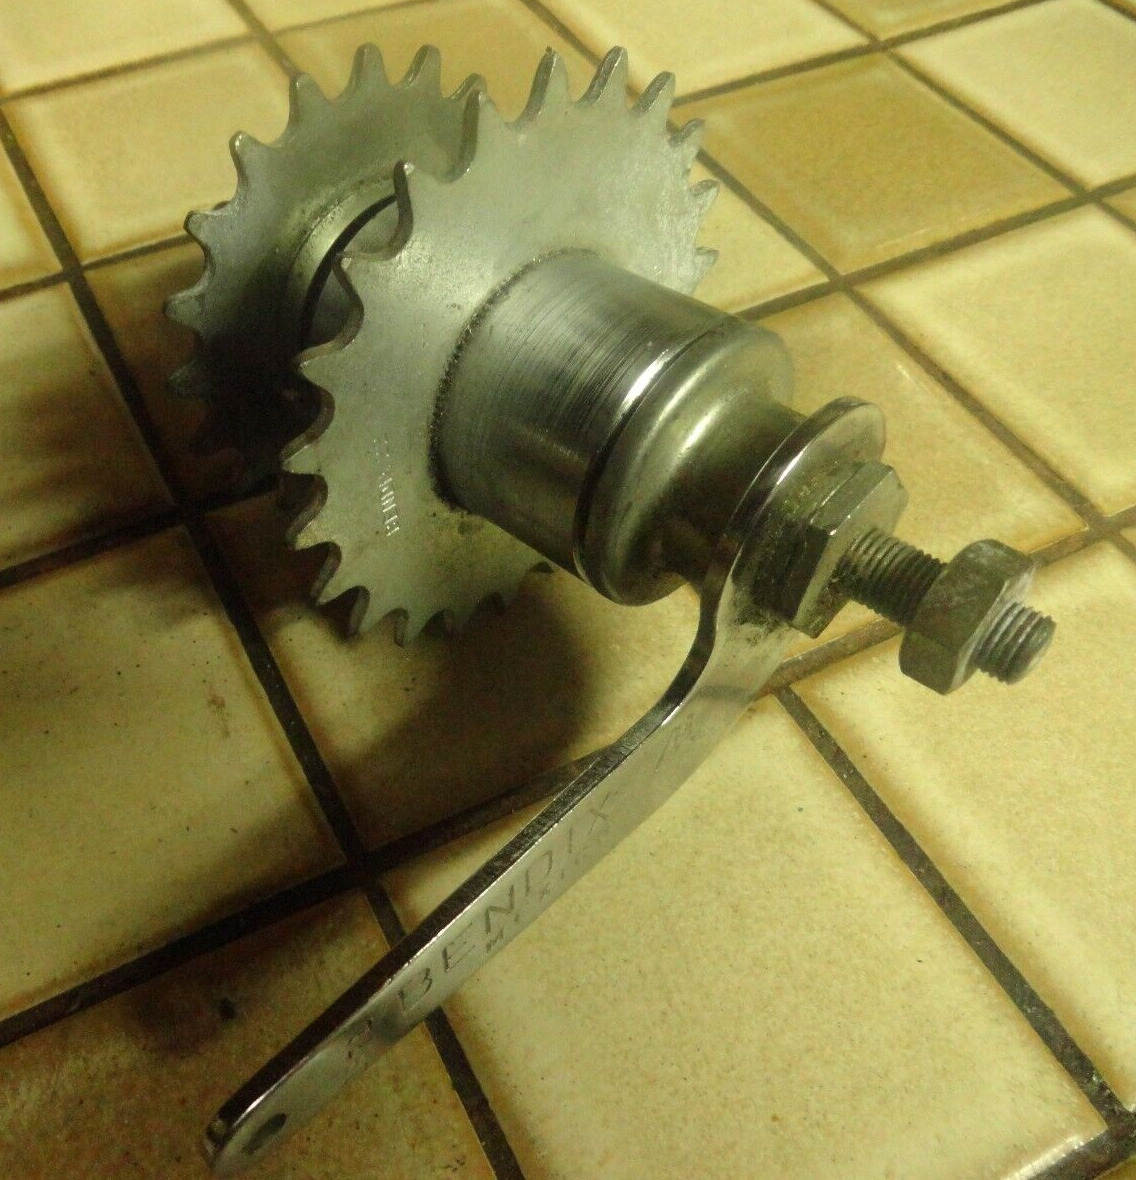 Bendix 76 MEXICO 7260 TRICYCLE 3 WHEELER Bicycle TRIKE Hub 22 TOOTH & 19 TOOTH